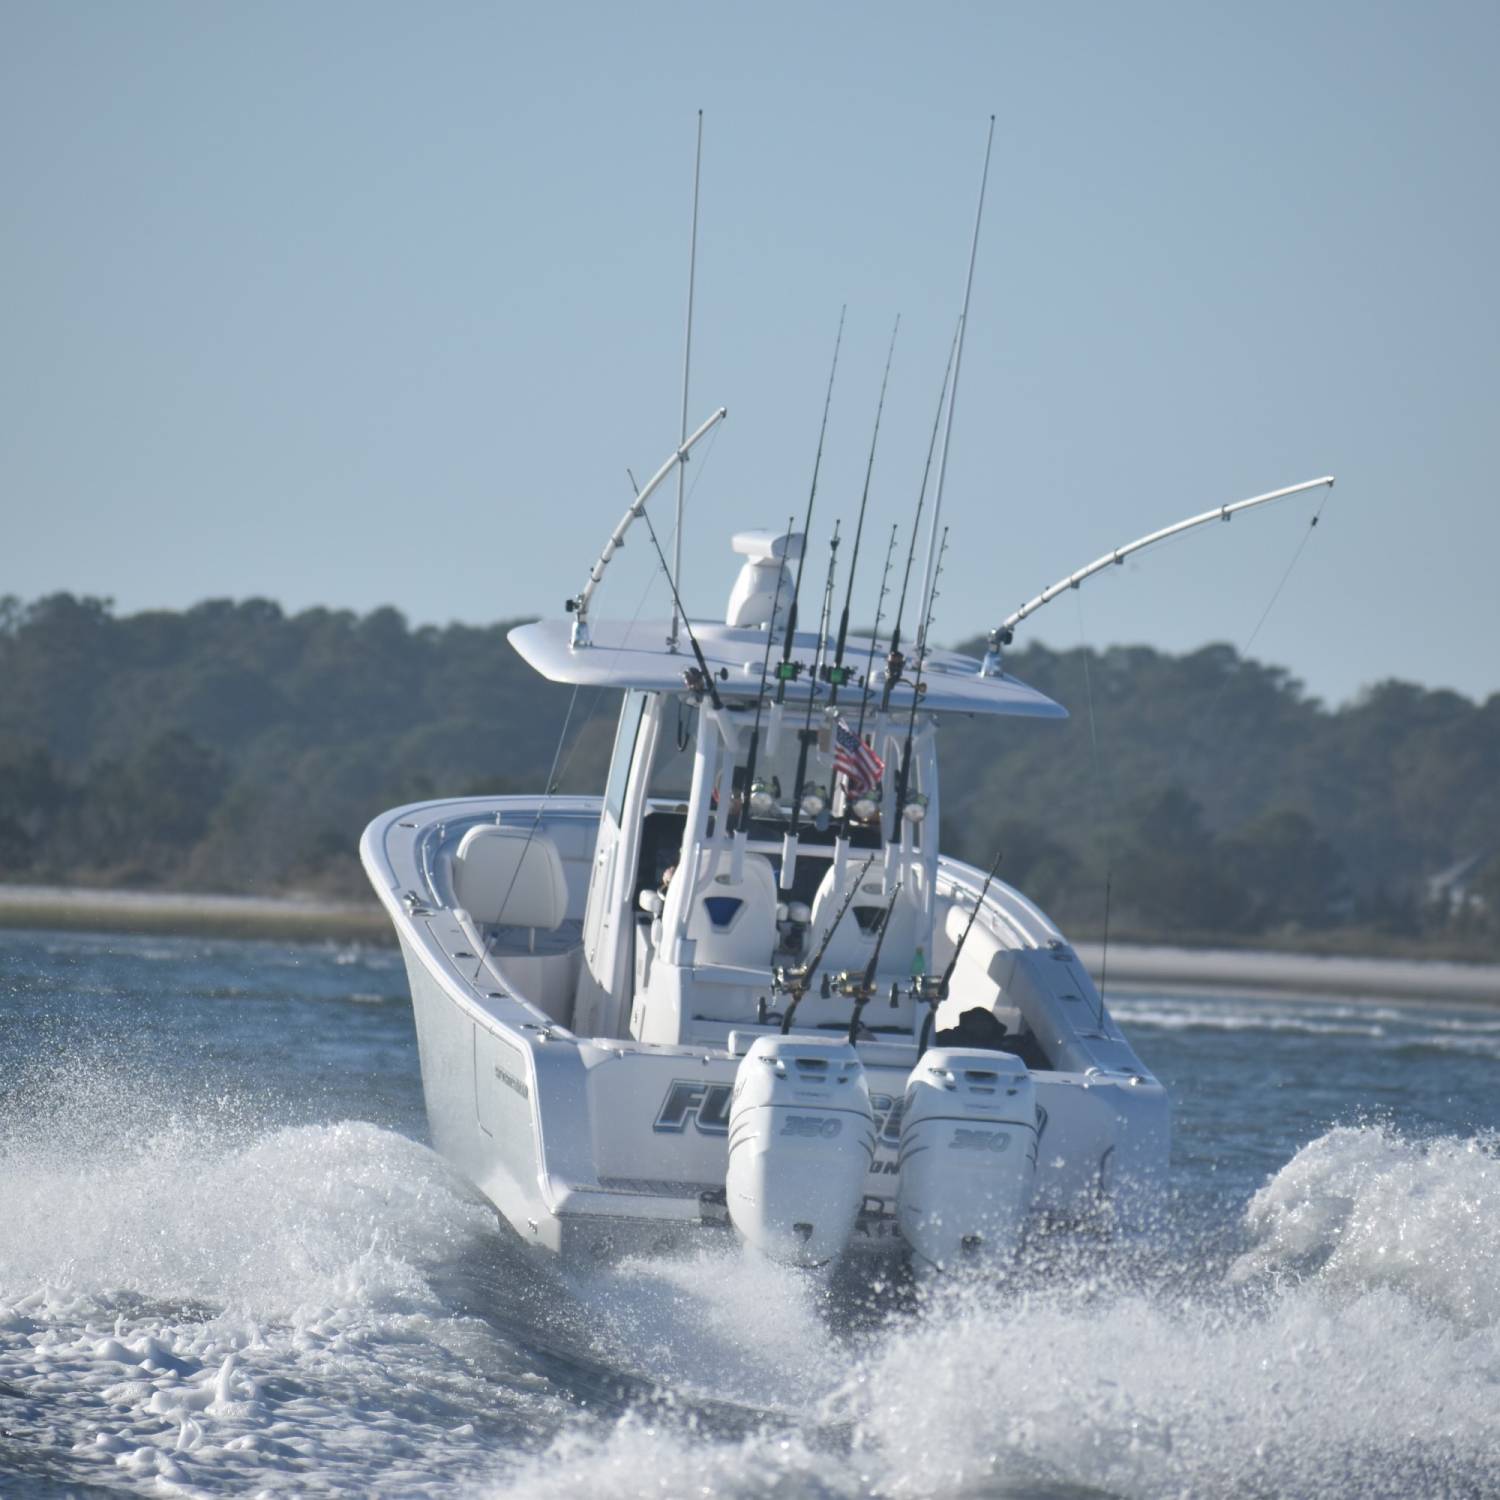 Title: Returning from the Gulf Stream - On board their Sportsman Open 302 Center Console - Location: Masonboro Inlet, NC. Participating in the Photo Contest #SportsmanJanuary2024